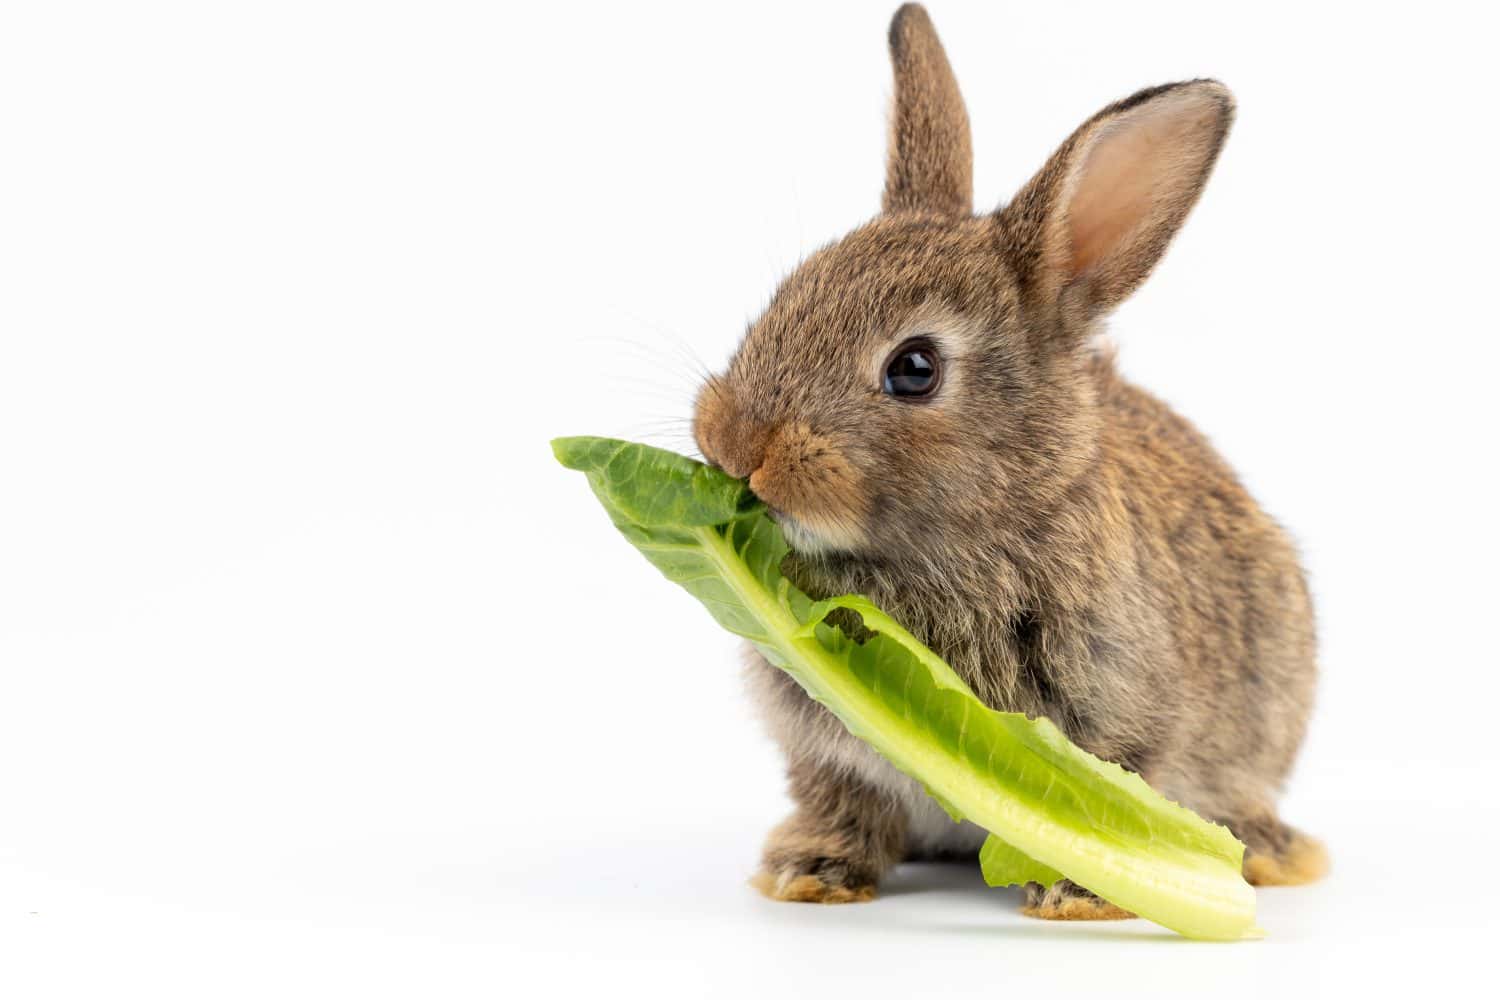 A healthy Lovely baby bunny easter fluffy brown rabbit eating food, green vegetables, on white background. selective focus. Animal, rabbit food, healthy lifestyle concept.